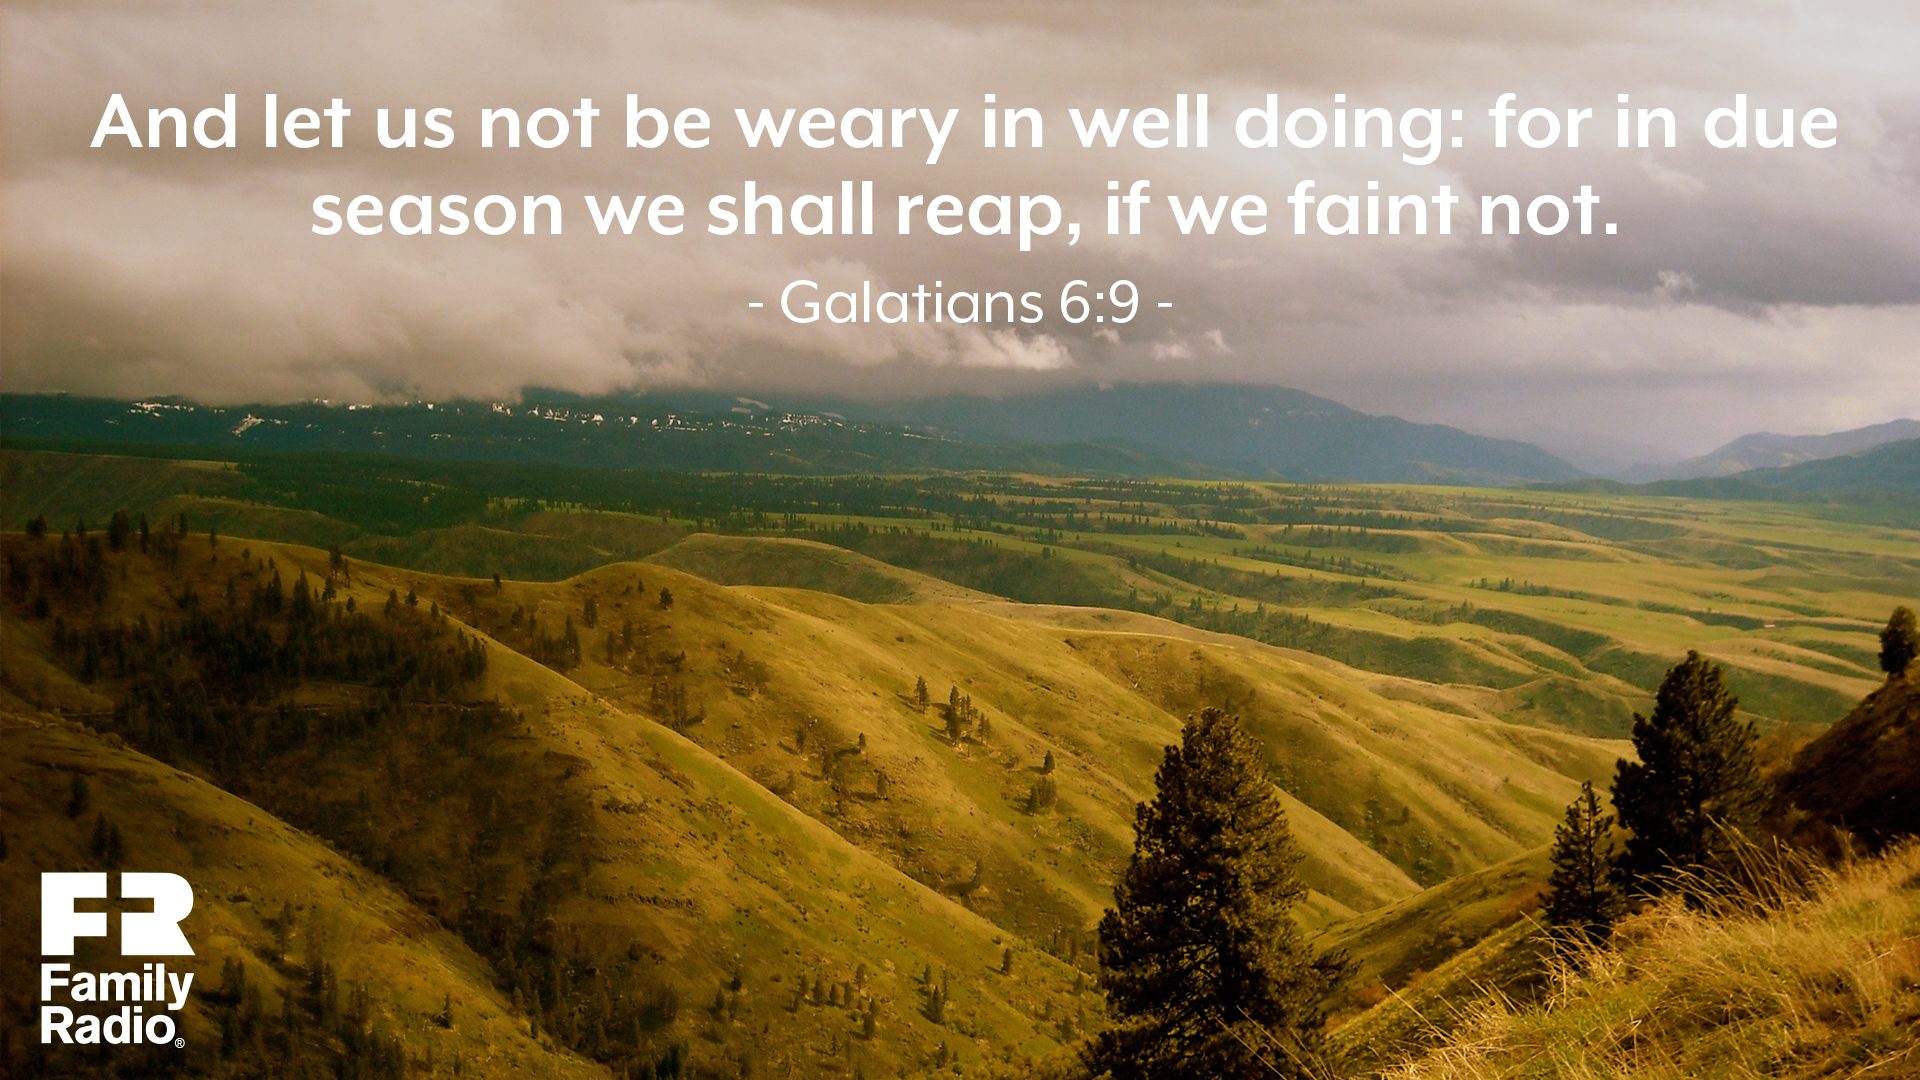 "And let us not be weary in well doing: for in due season we shall reap, if we faint not."